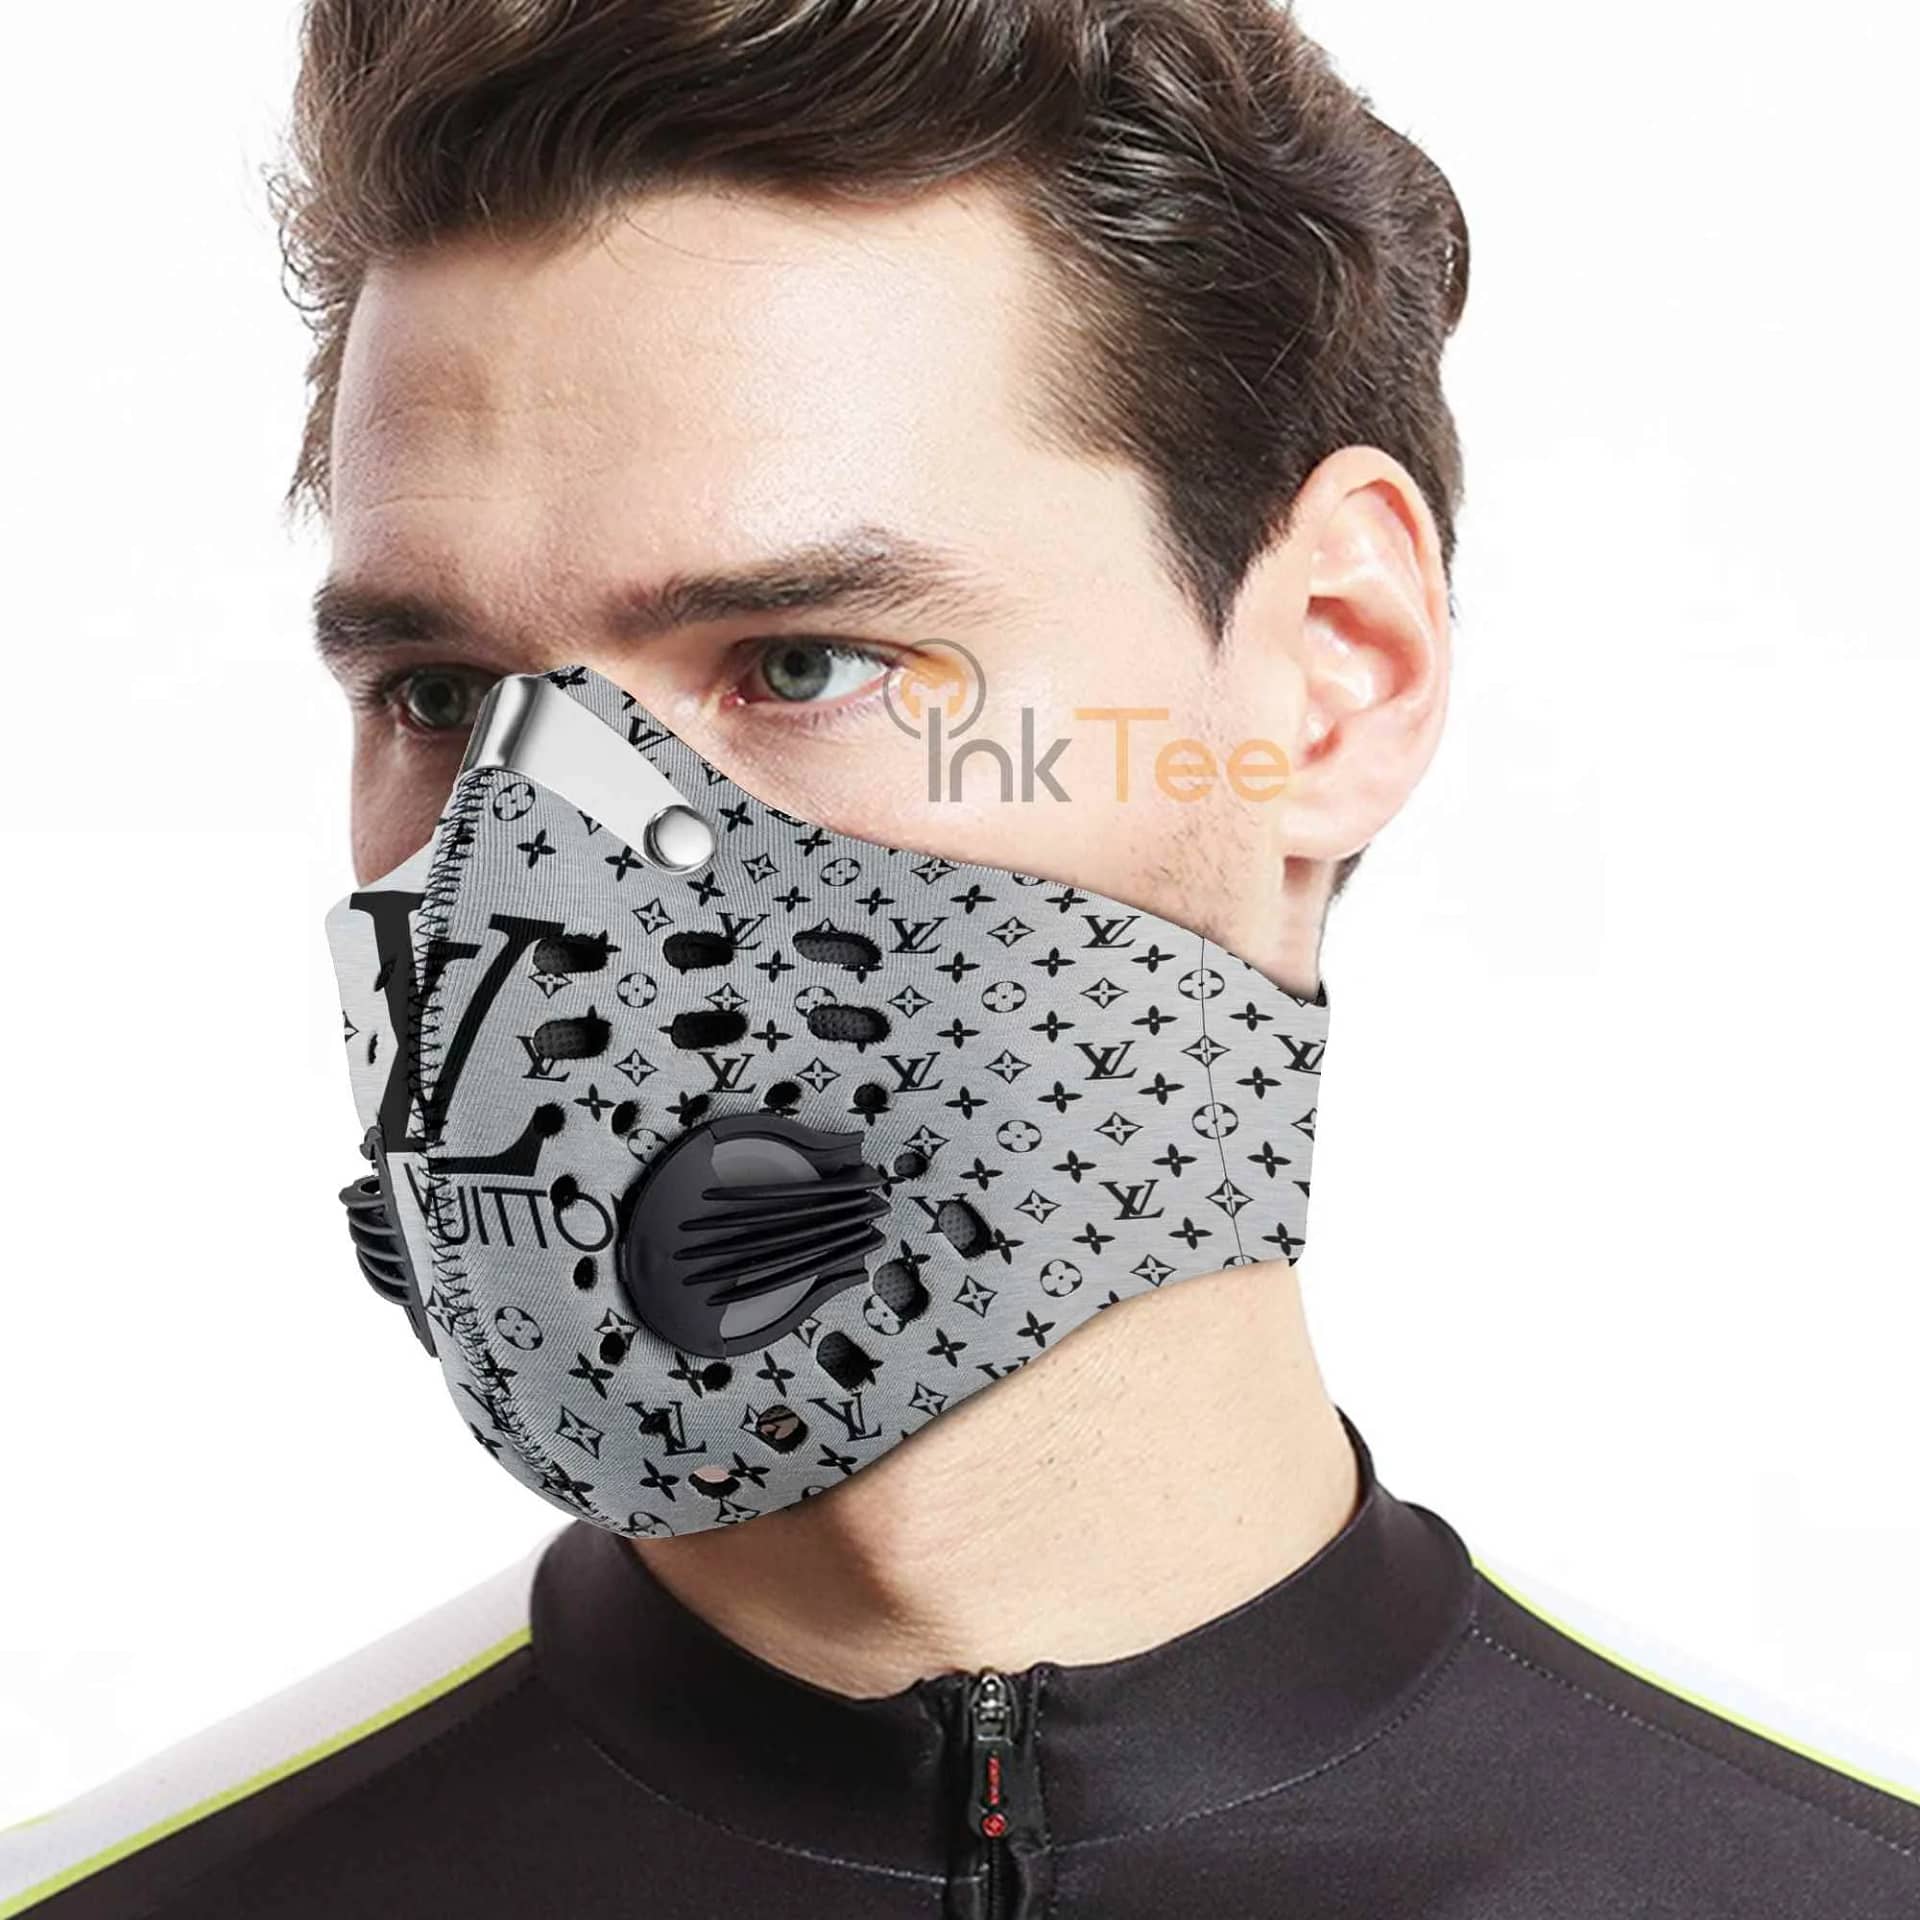 Amazon Best Selling Luis Vuitton Sku 219 Filter Activated Carbon Pm 2.5 Face Mask